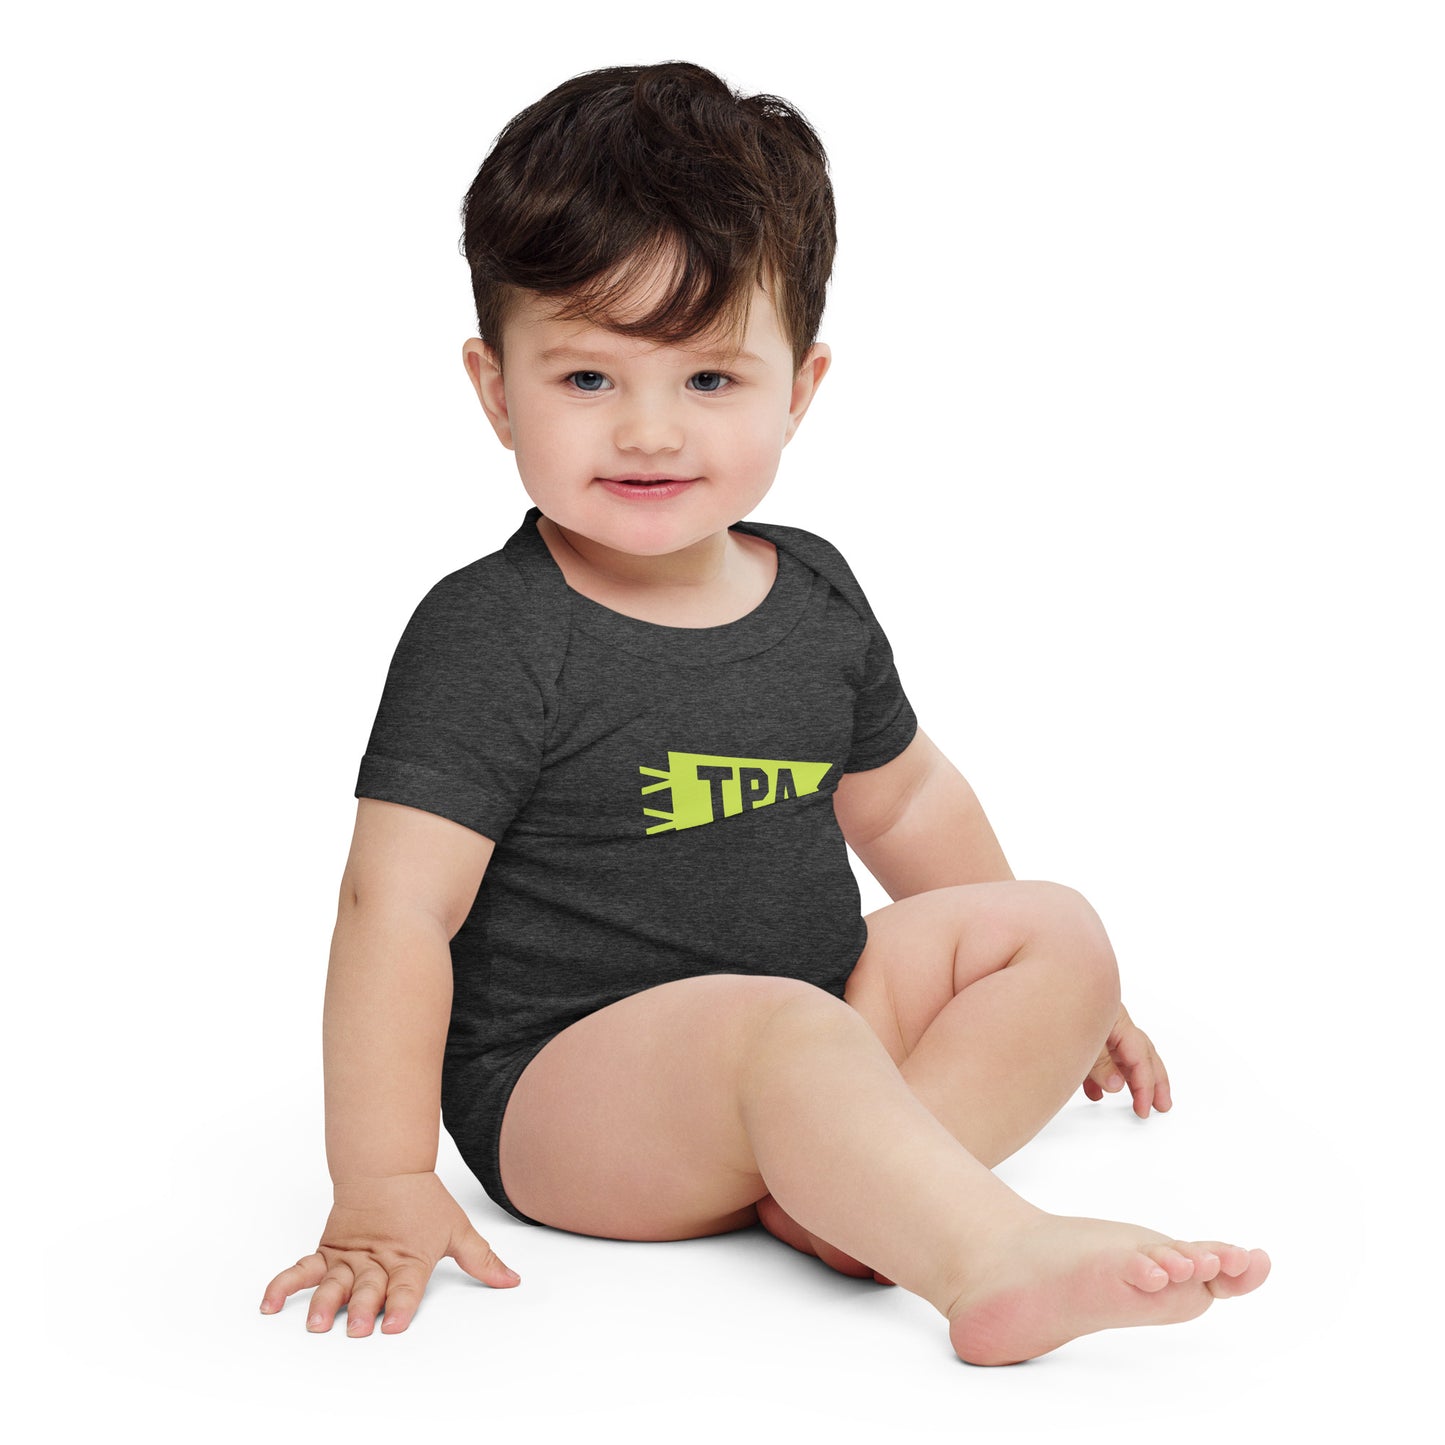 Airport Code Baby Bodysuit - Green • TPA Tampa • YHM Designs - Image 04